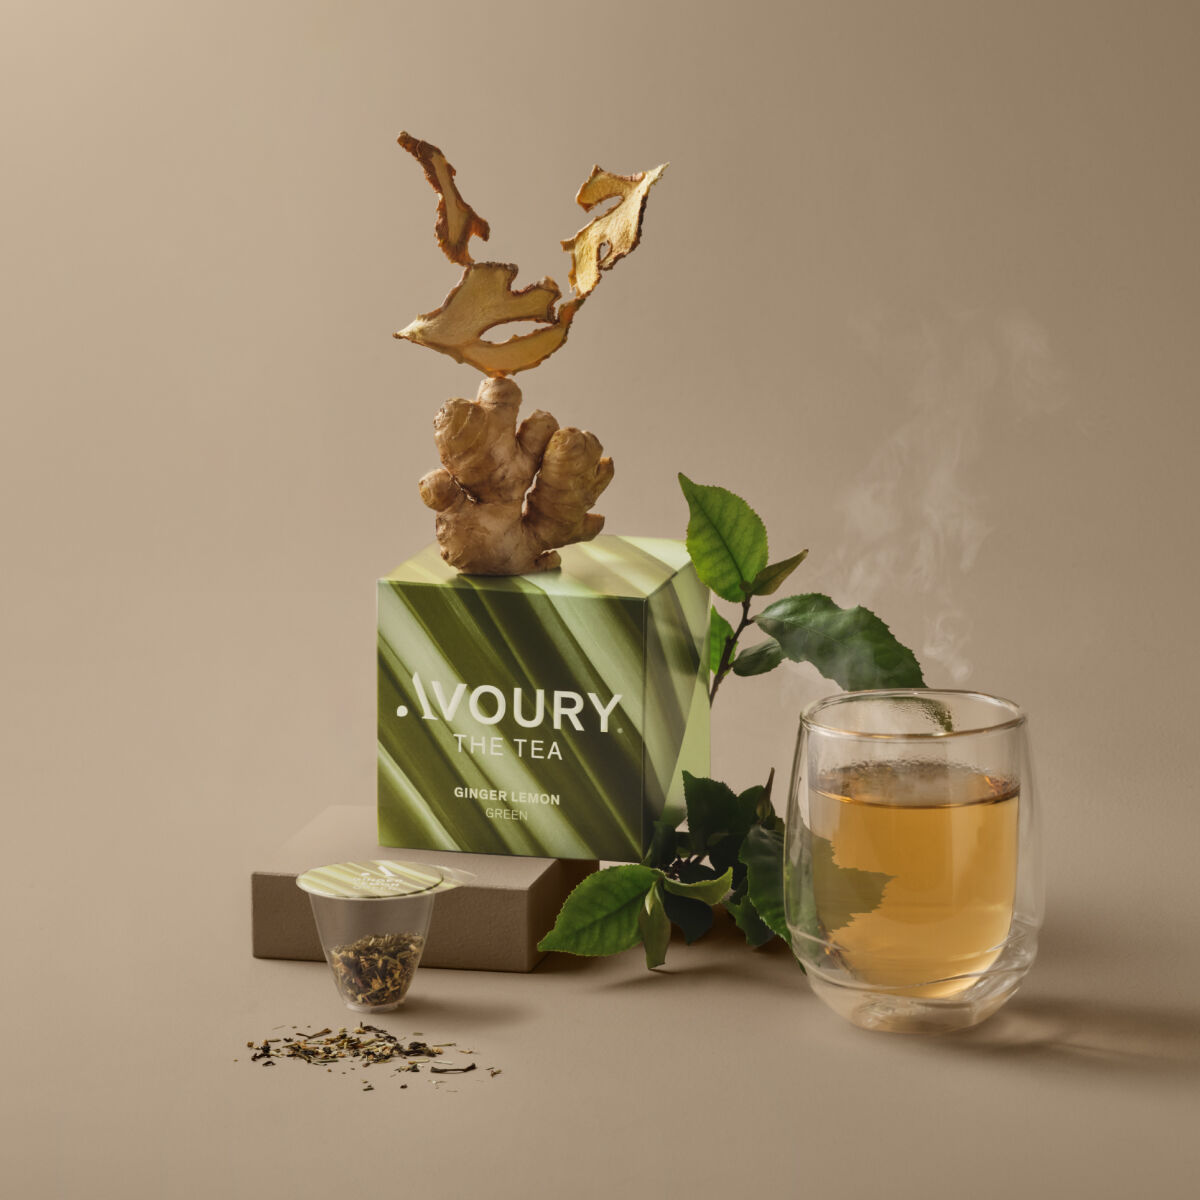 avoury tea box with a cup of tea filled with Avoury ginger lemon tea